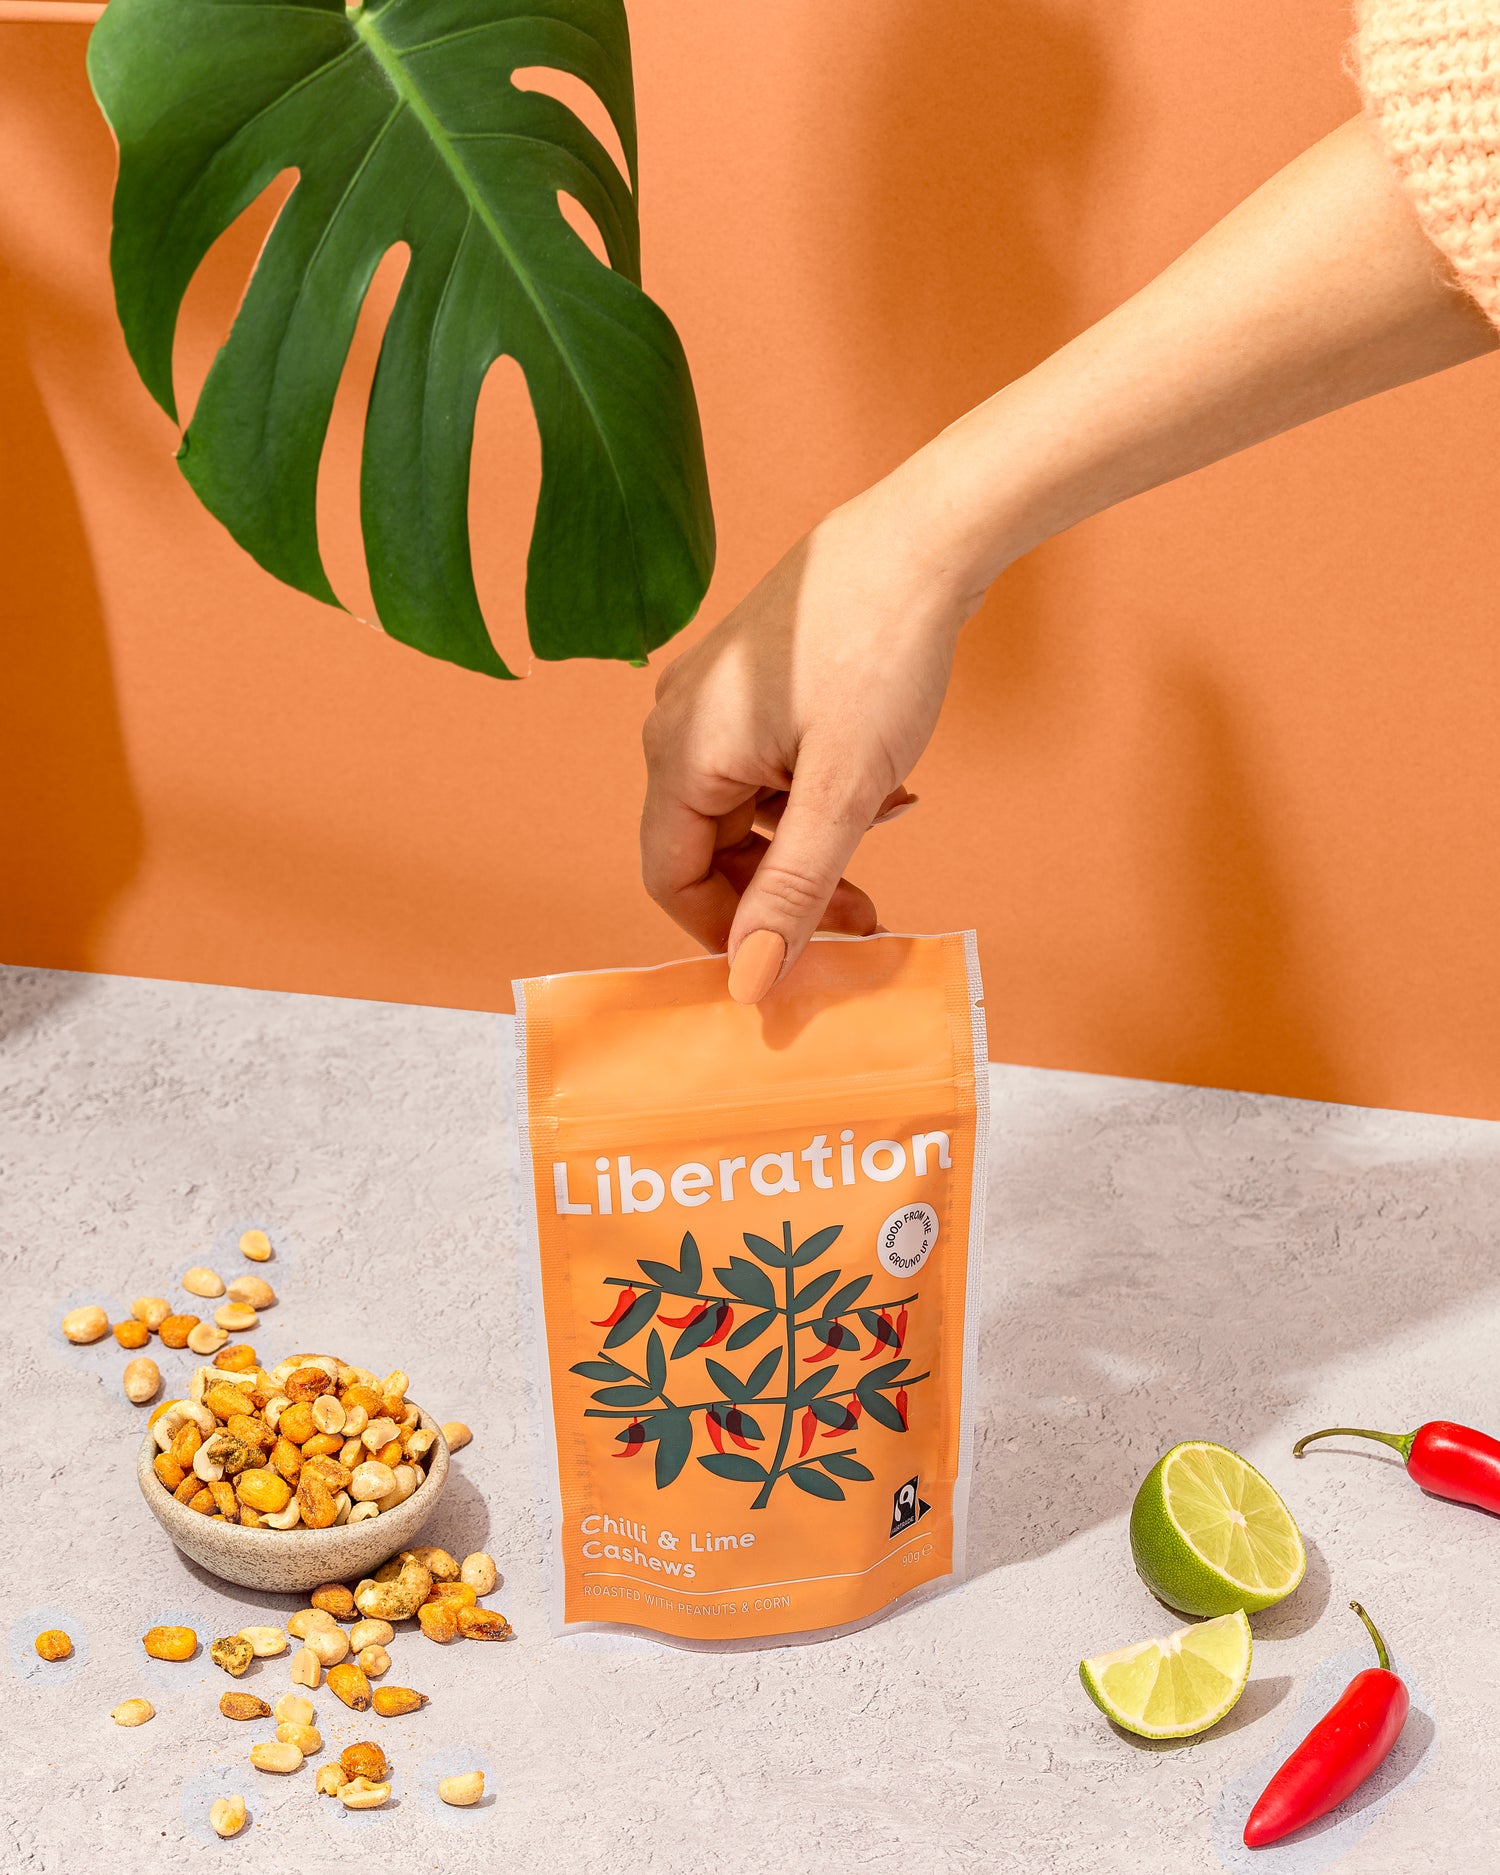 Grab a bag of delicious Liberation Fairtrade nuts - sustainably sourced from smallholder farmers around the world